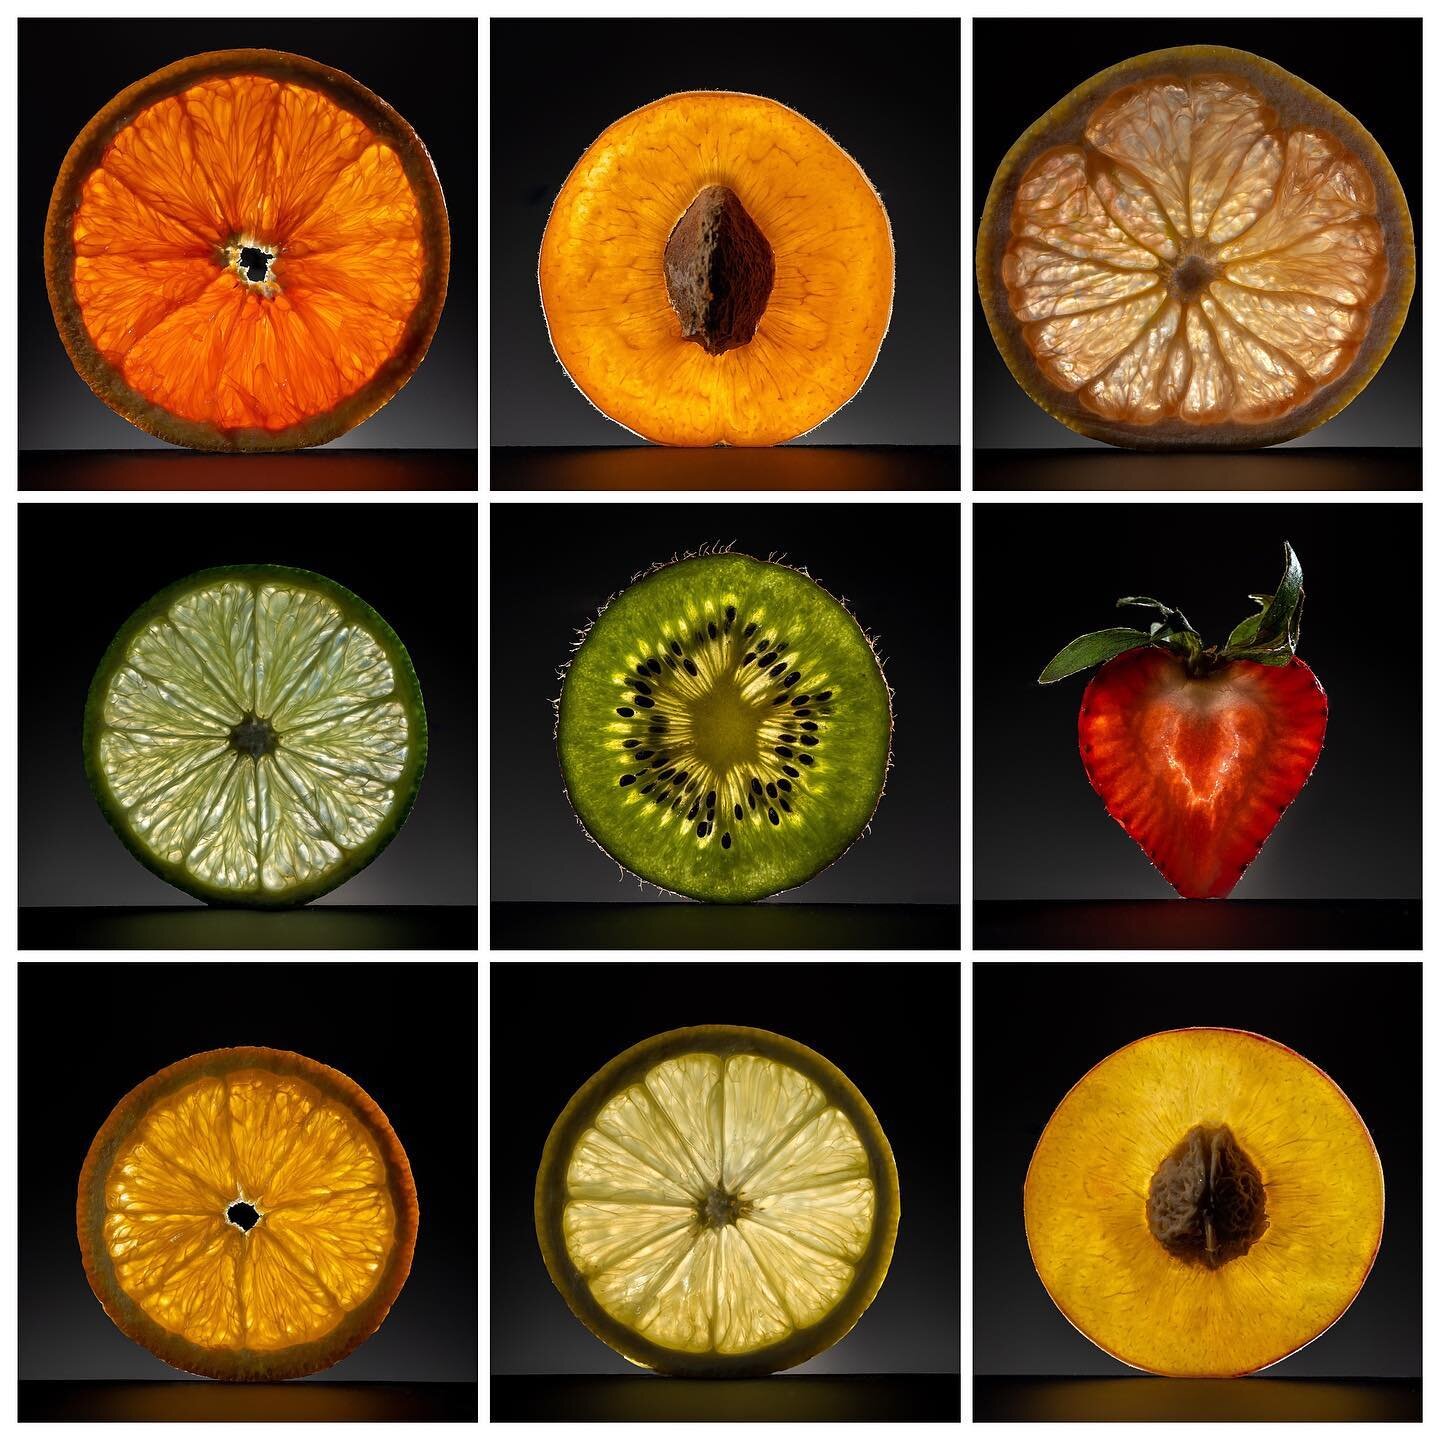 &bull; The Fruit Series &bull;

This was such a fun project to do and I&rsquo;m pretty pleased with the results! 👌🏻 The translucency of the fruit creates a stained glass appearance which expresses the beauty of the natural patterns each has.
.
&bul